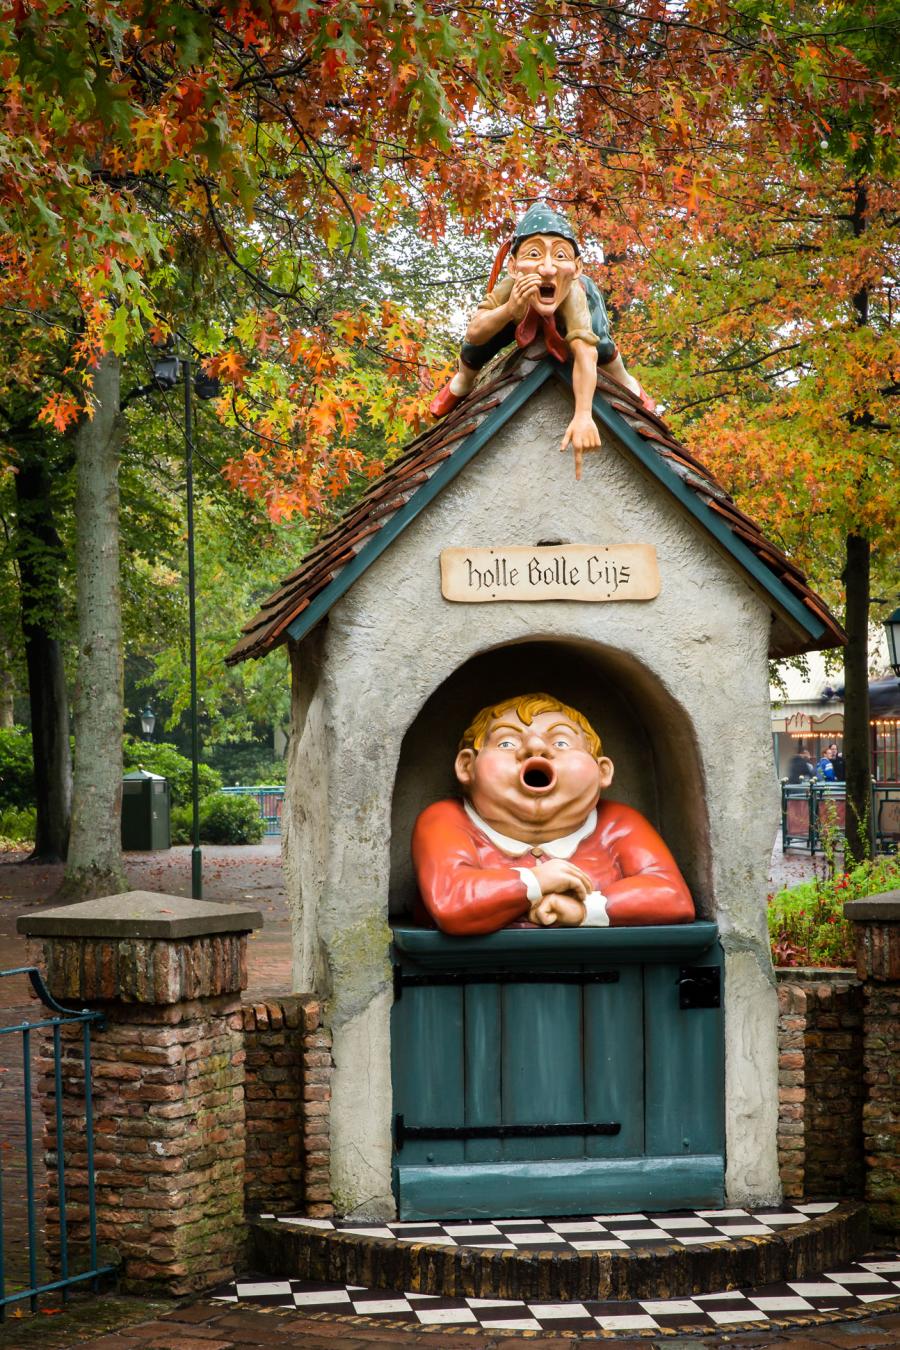 Holle Bolle Gijs, or Big Mouth bins, encourage Efteling guests to dispose paper products by placing them into the vacuum-powered mouths